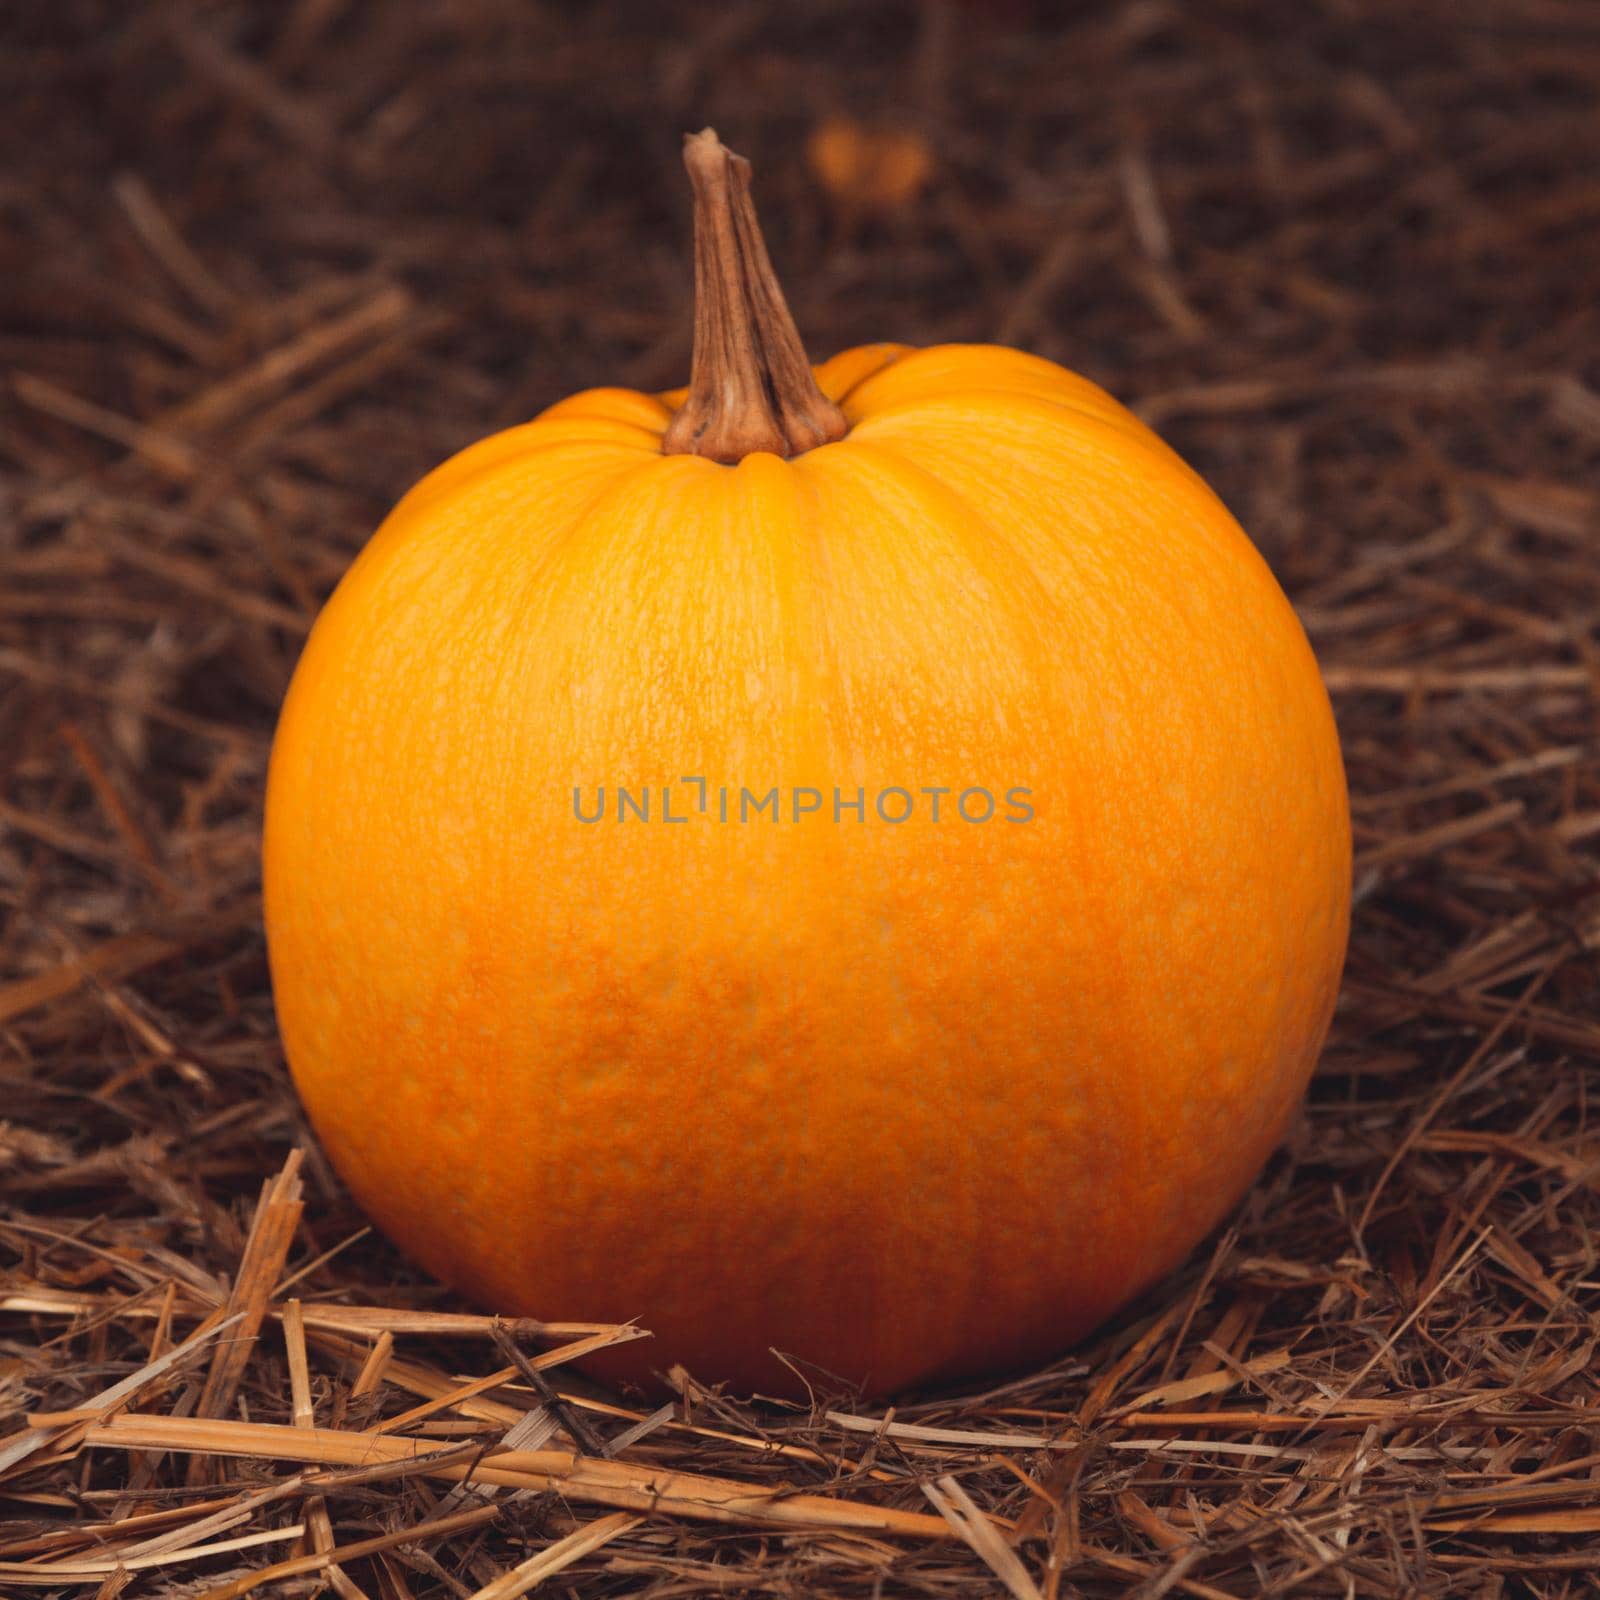 Big orange fresh pumpkin on hay. Thanksgiving day concept with copy space for text.